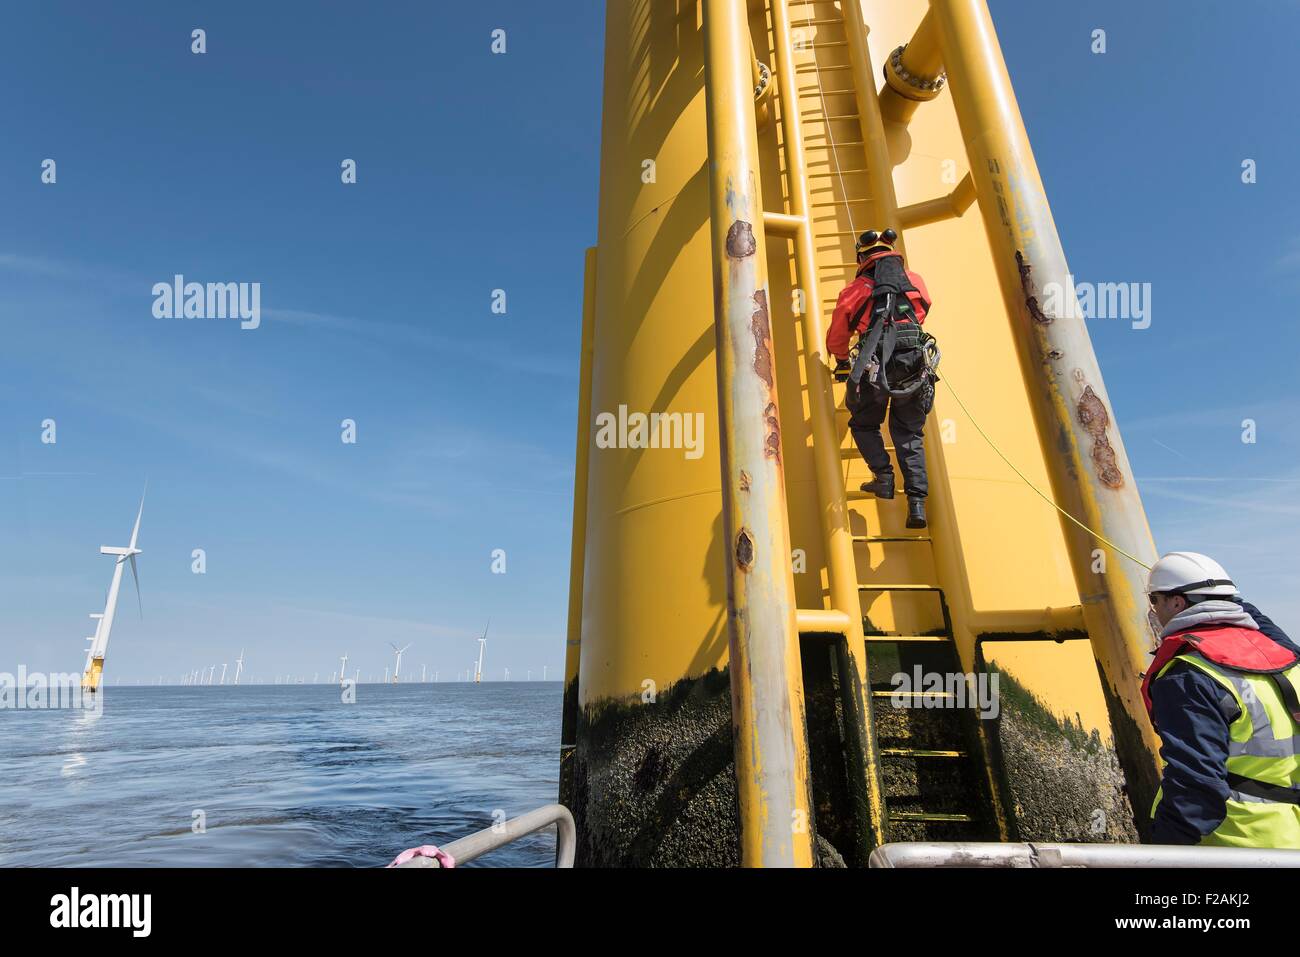 Engineers climbing wind turbine ladder from boat at offshore windfarm Stock Photo